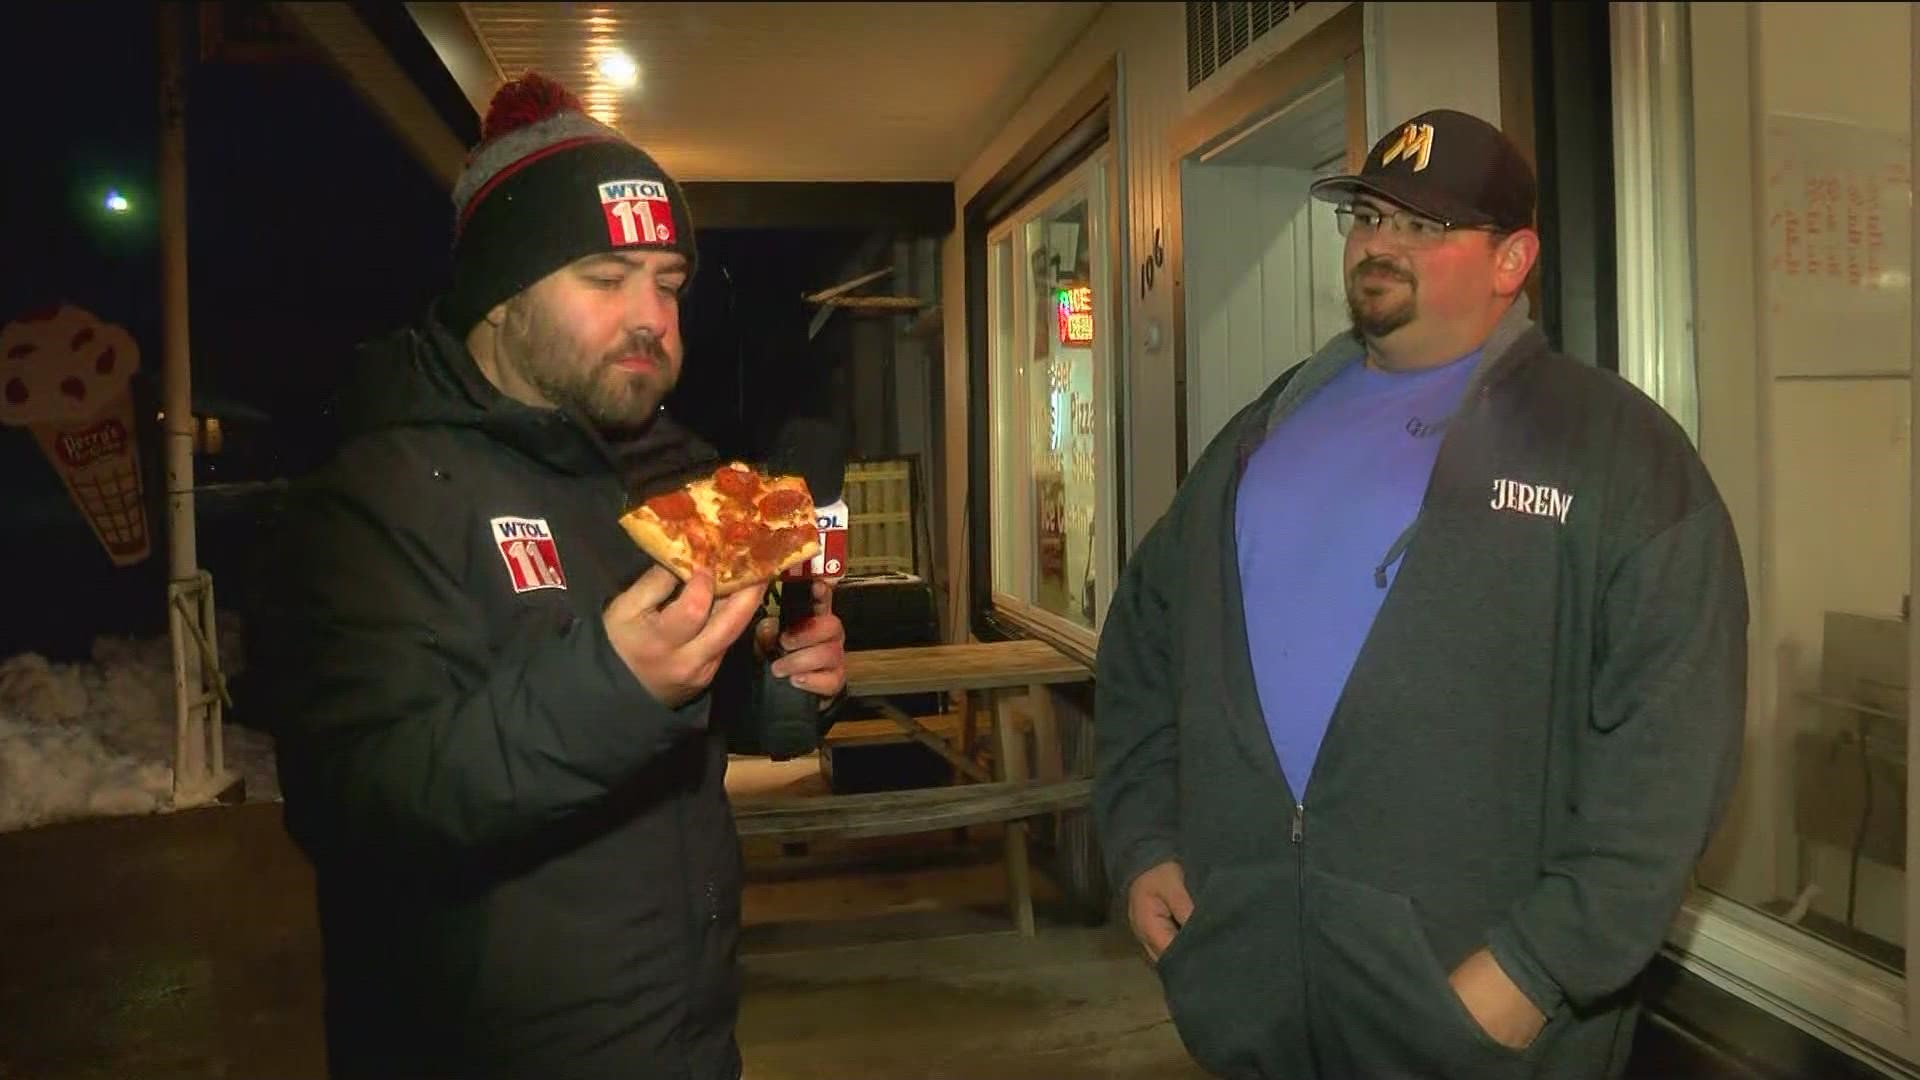 Florida, Ohio, is between Napoleon and Defiance in Henry County. WTOL 11 Sports director Jordan Strack is live from Clubhouse Pizza, the best restaurant in town.